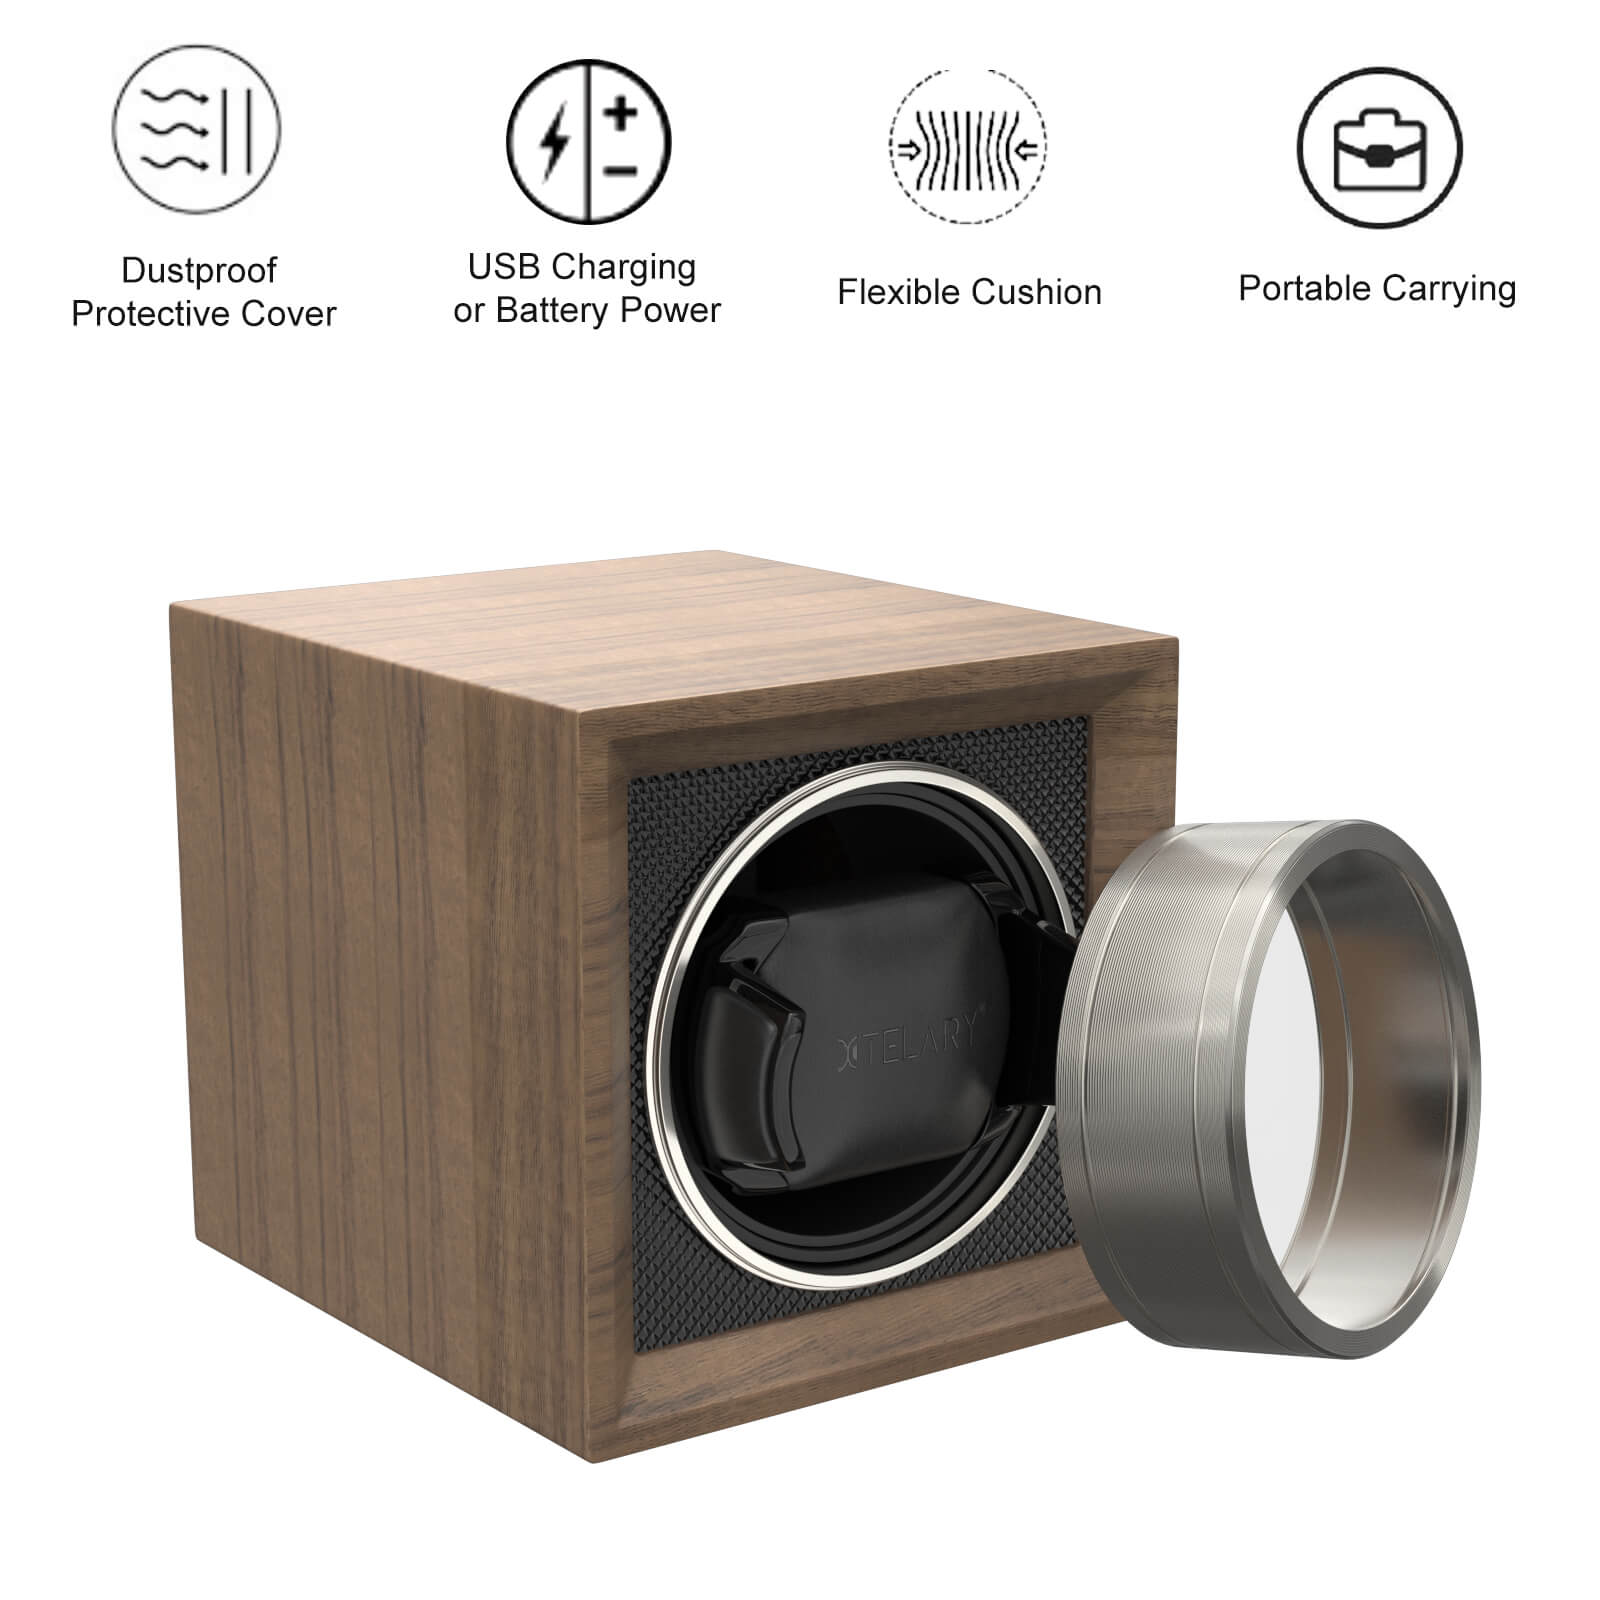 Single Watch Winder with Dual Power Supply and Quiet Mabuchi Motor - Light Wood Grain